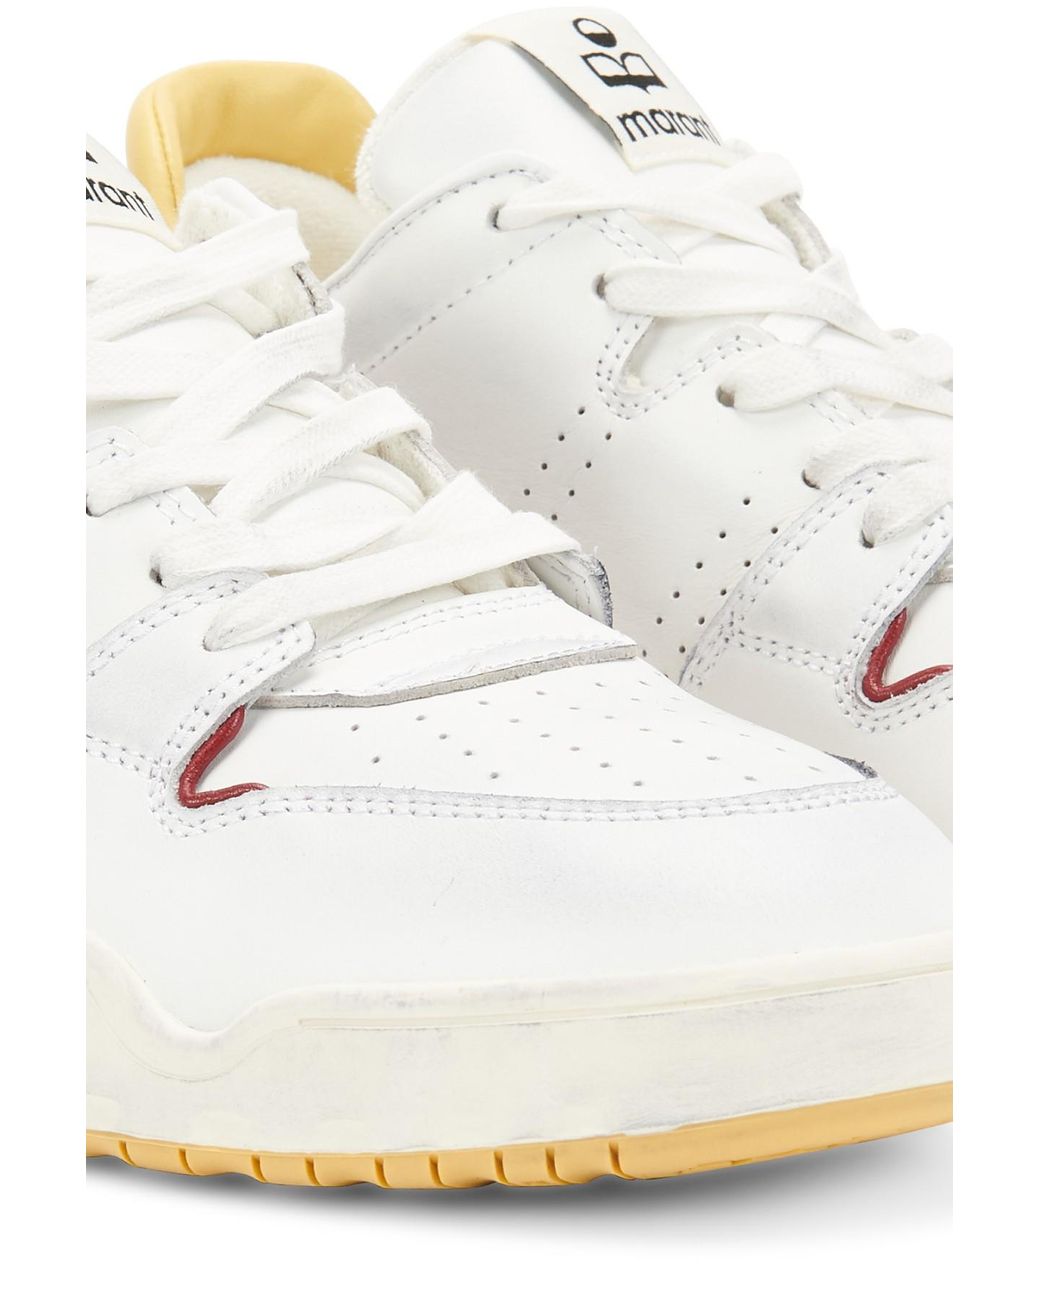 Isabel Marant Emree Sneakers in Yellow - Lyst